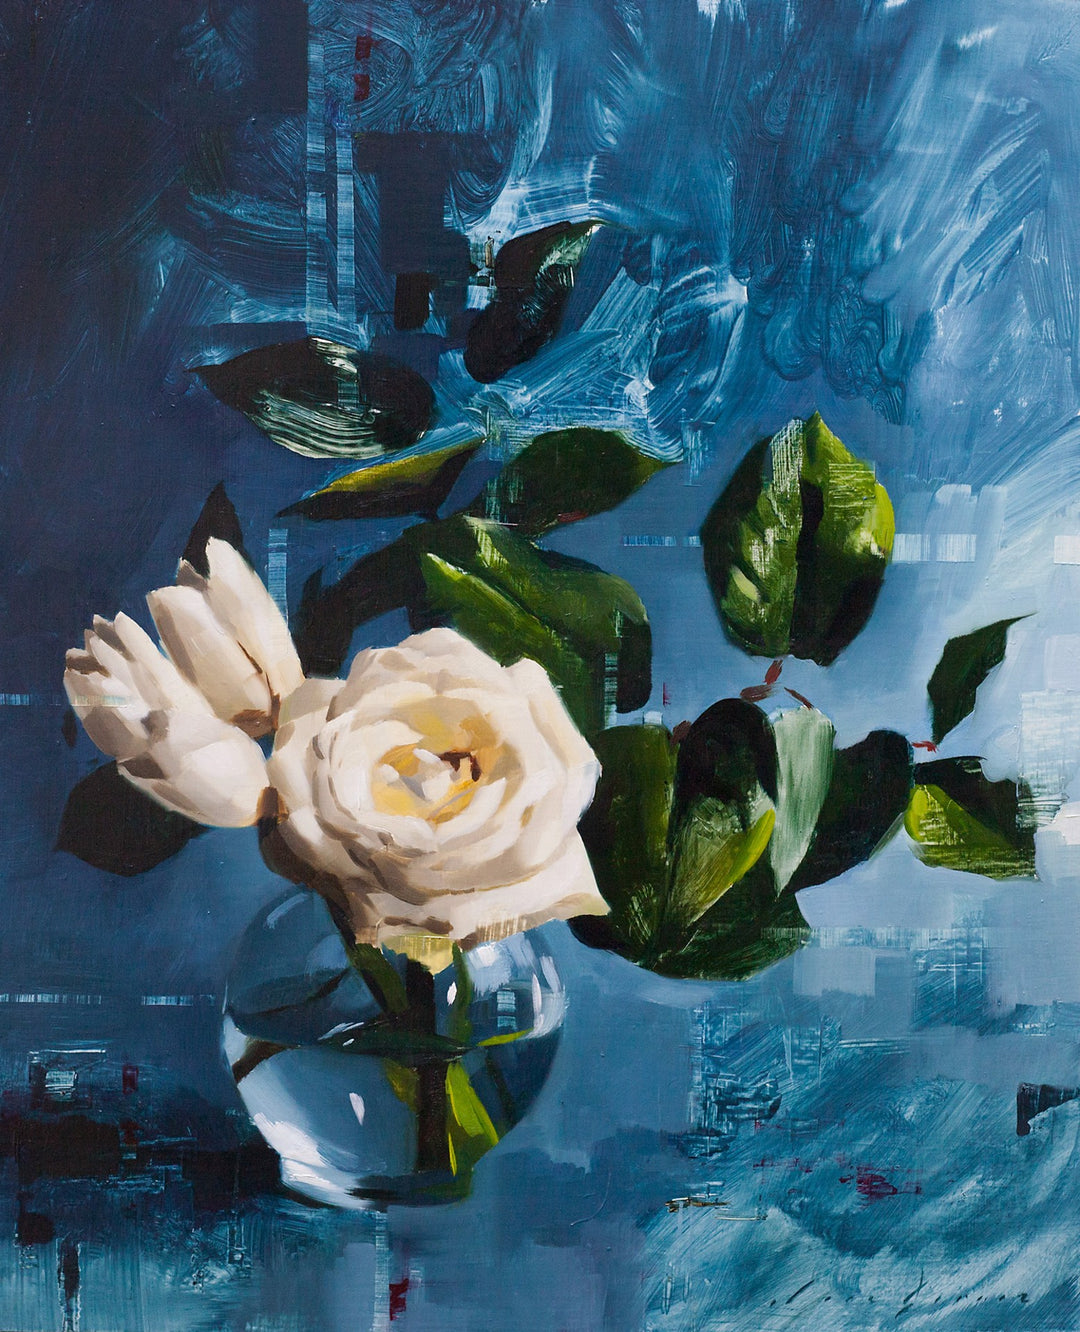 A painting of white roses in a vase on a blue background, created with oil on panel by Jon Doran - "Tulips and Rose on Blue" by Jon Doran.